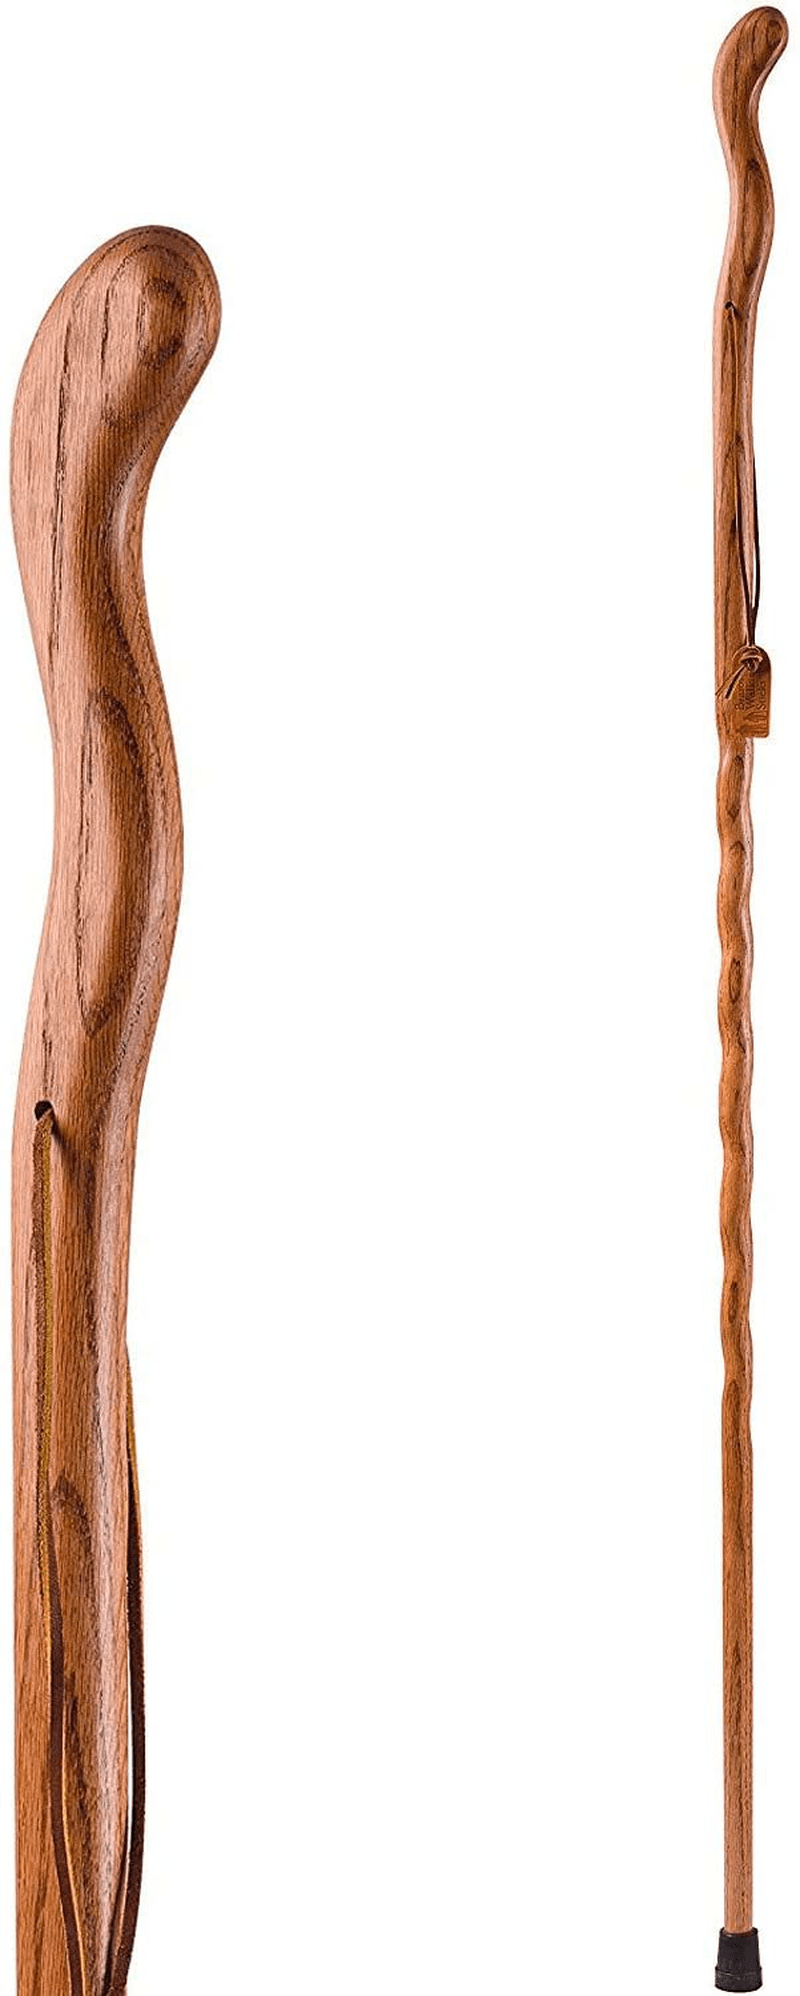 Brazos Free Form Hickory Walking Stick, Handcrafted Wooden Staff, Hiking Stick for Men and Women, Trekking Pole, Wooden Walking Stick, Made in the USA, 58 Inch